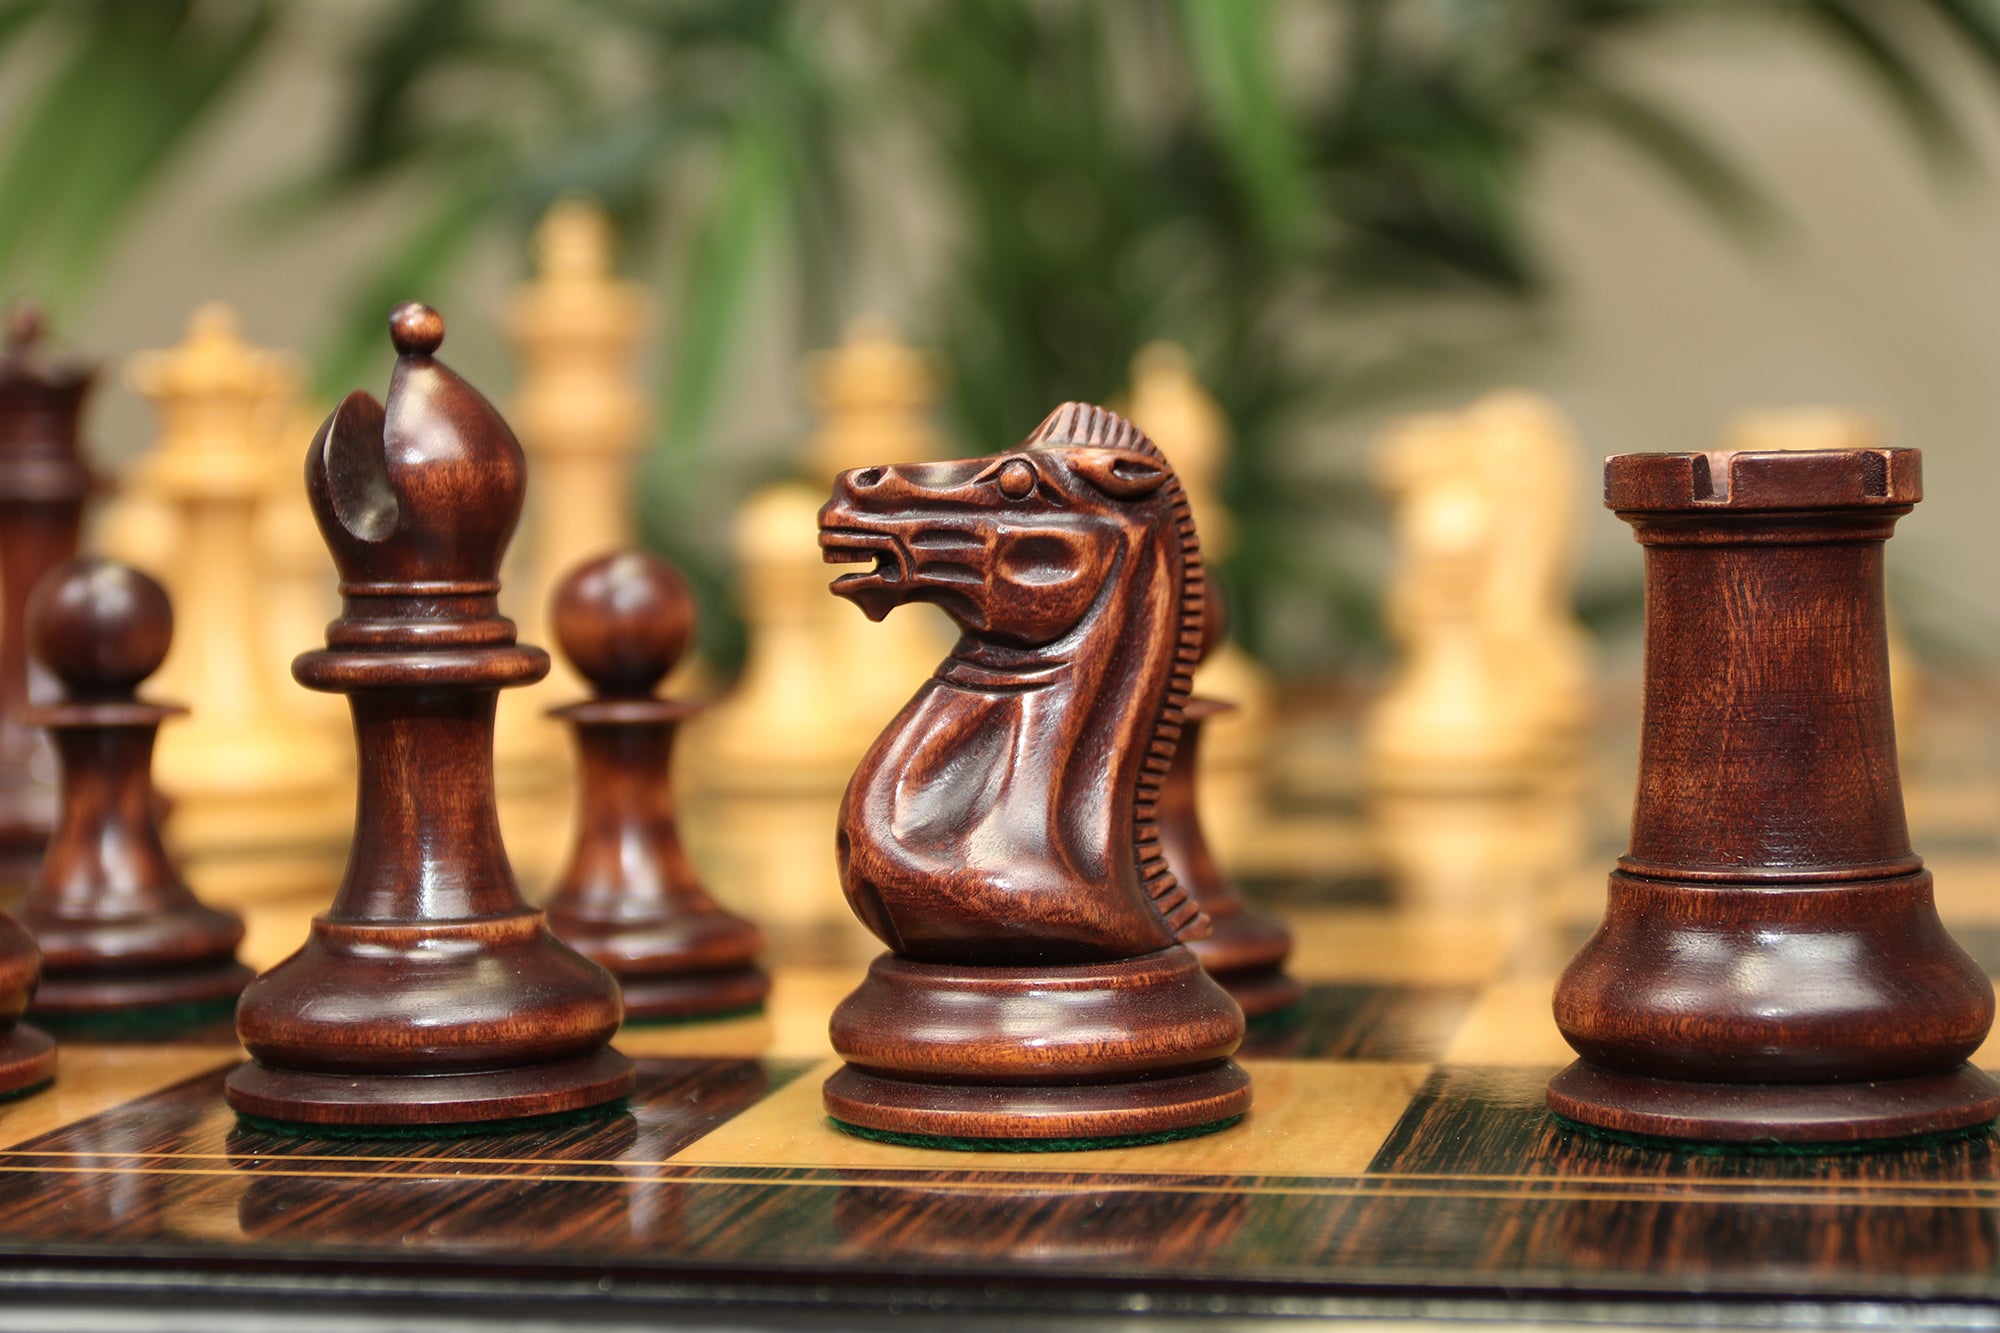 Nathaniel 1849 Reproduction Vintage 4.4" Chess Pieces Natural/Mahogany Stained Boxwood